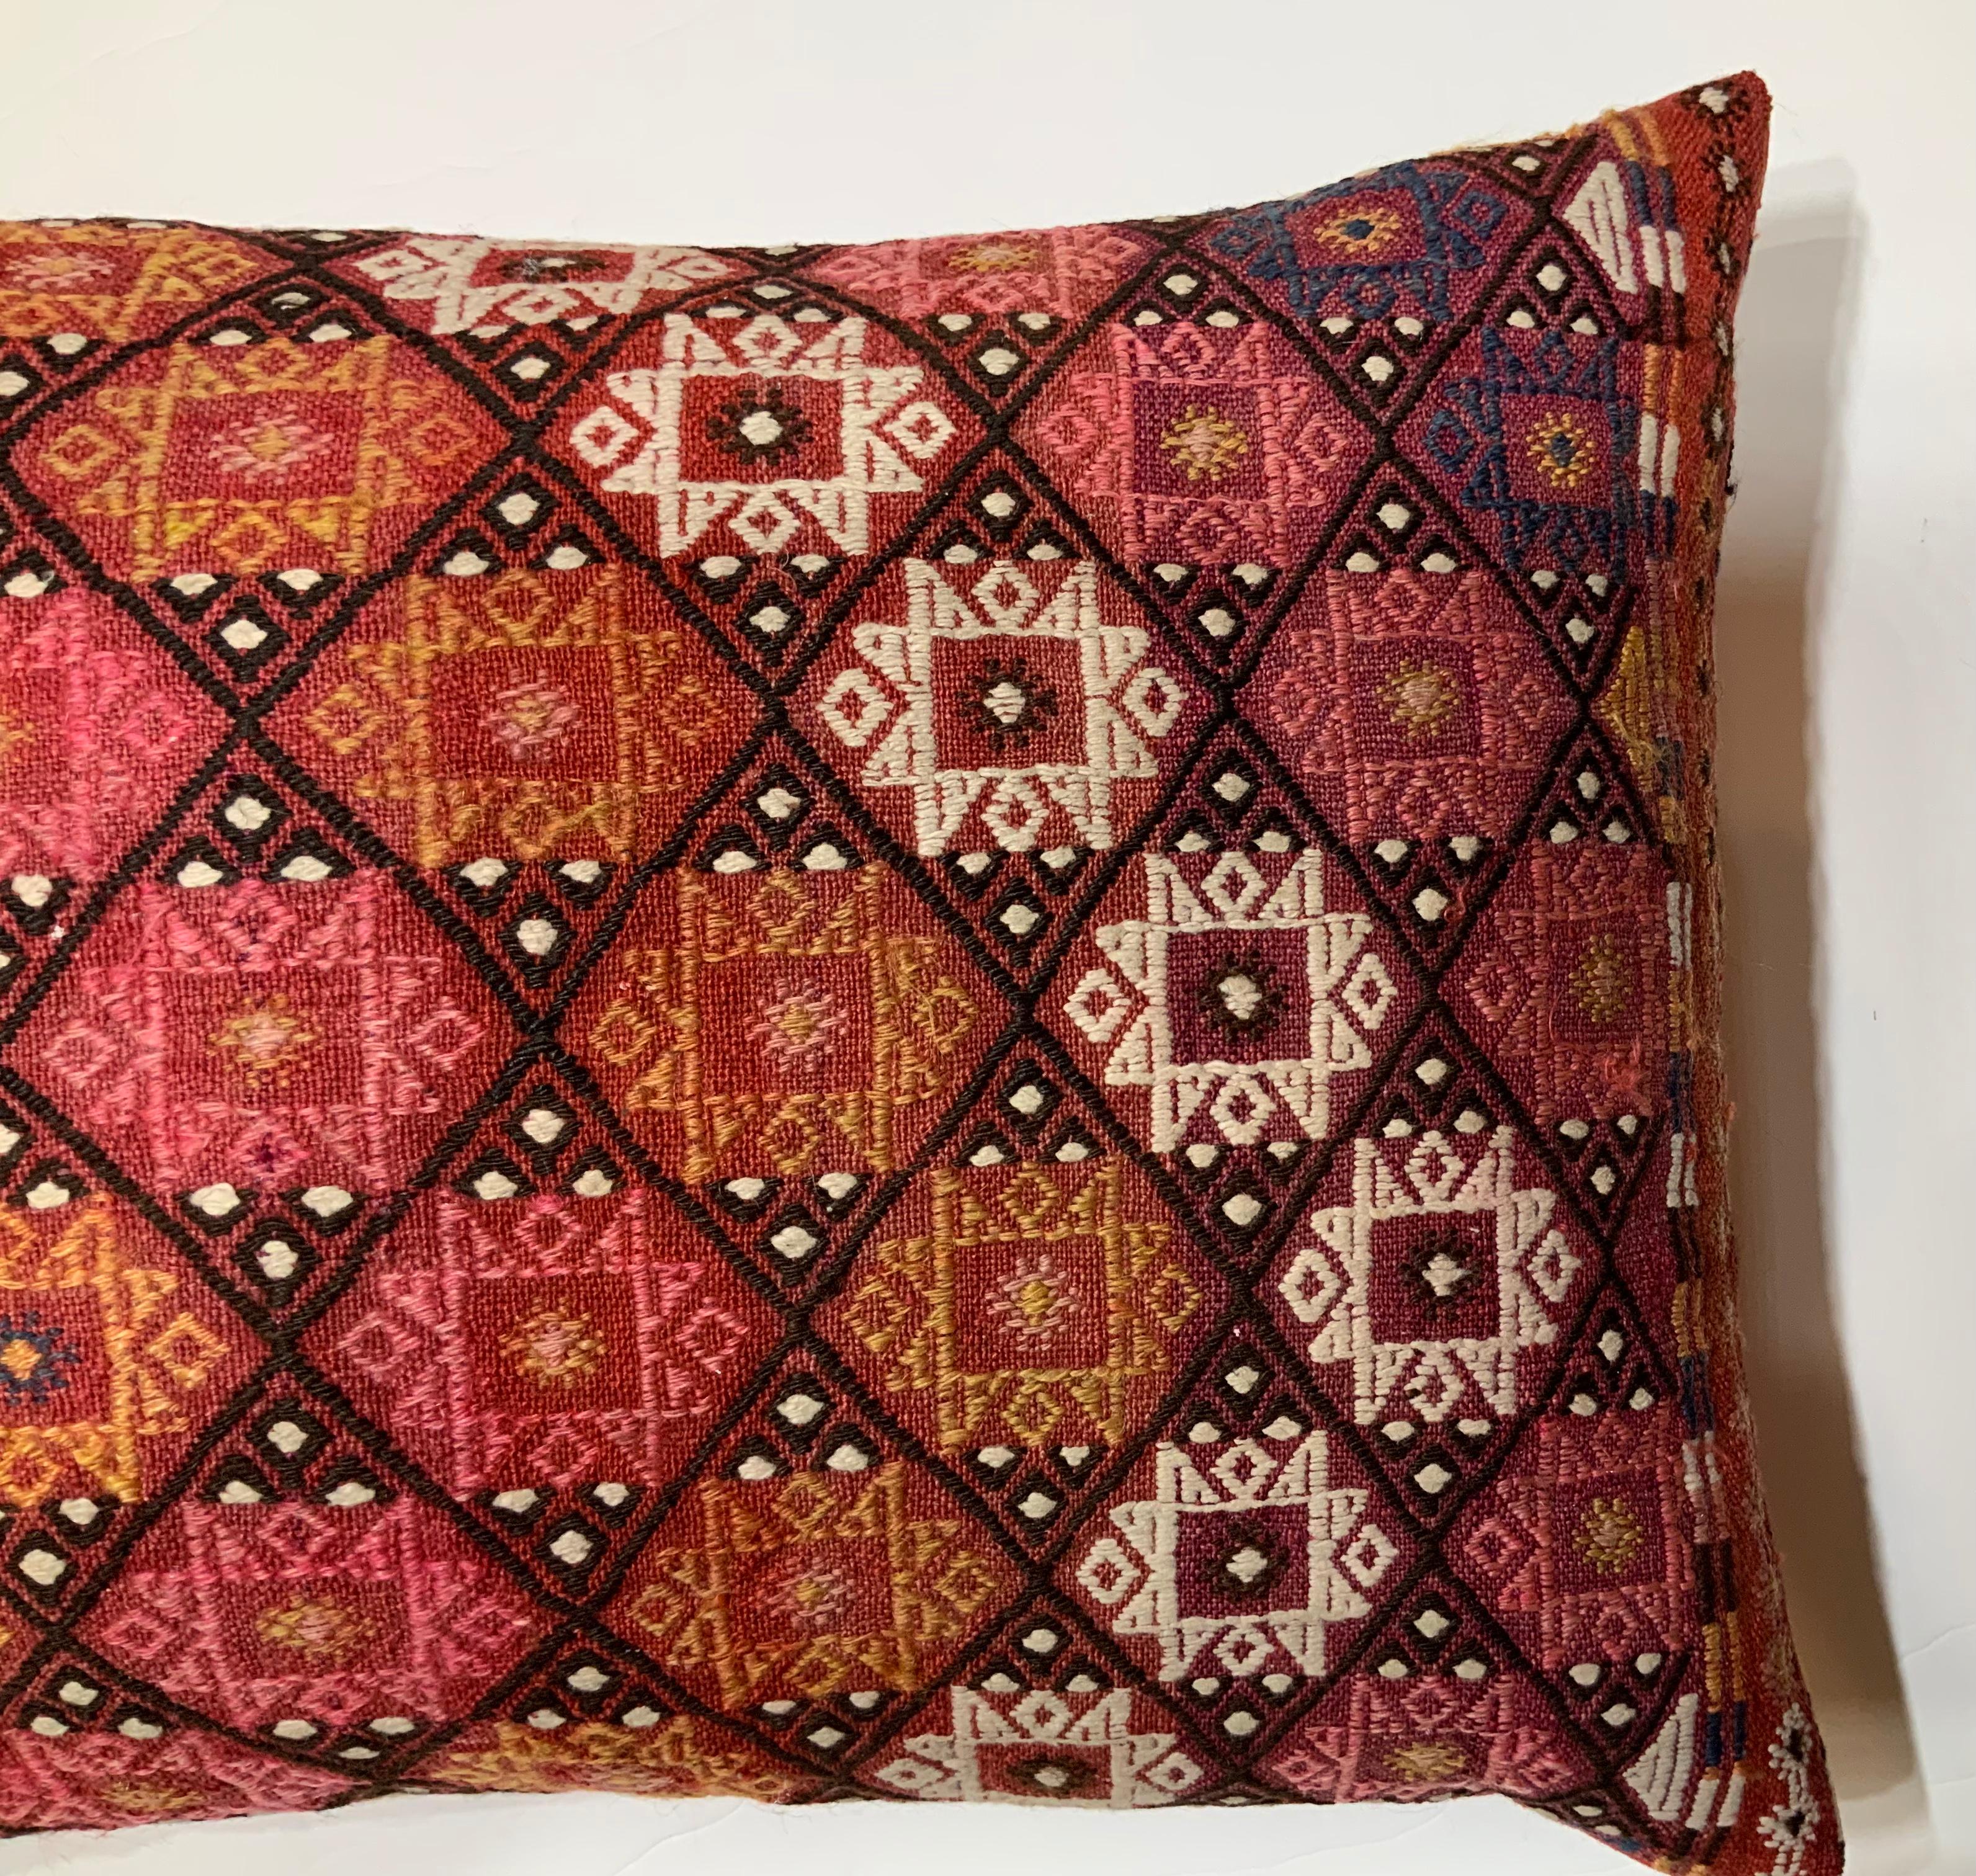 Single Vintage Hand Embroidery Pillow In Good Condition For Sale In Delray Beach, FL